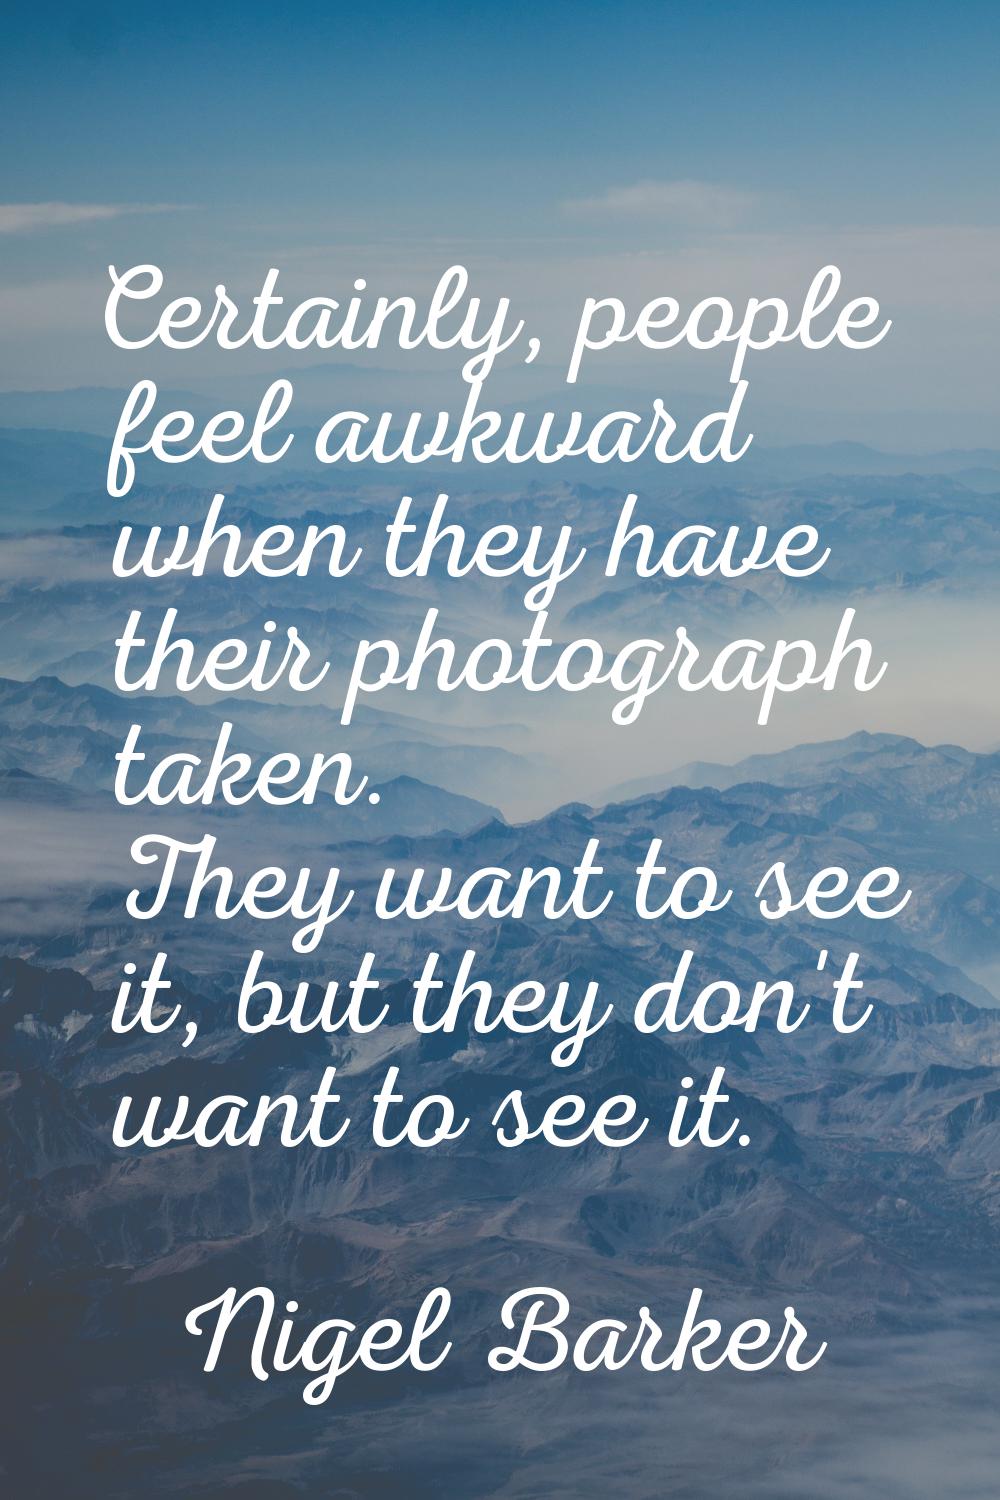 Certainly, people feel awkward when they have their photograph taken. They want to see it, but they